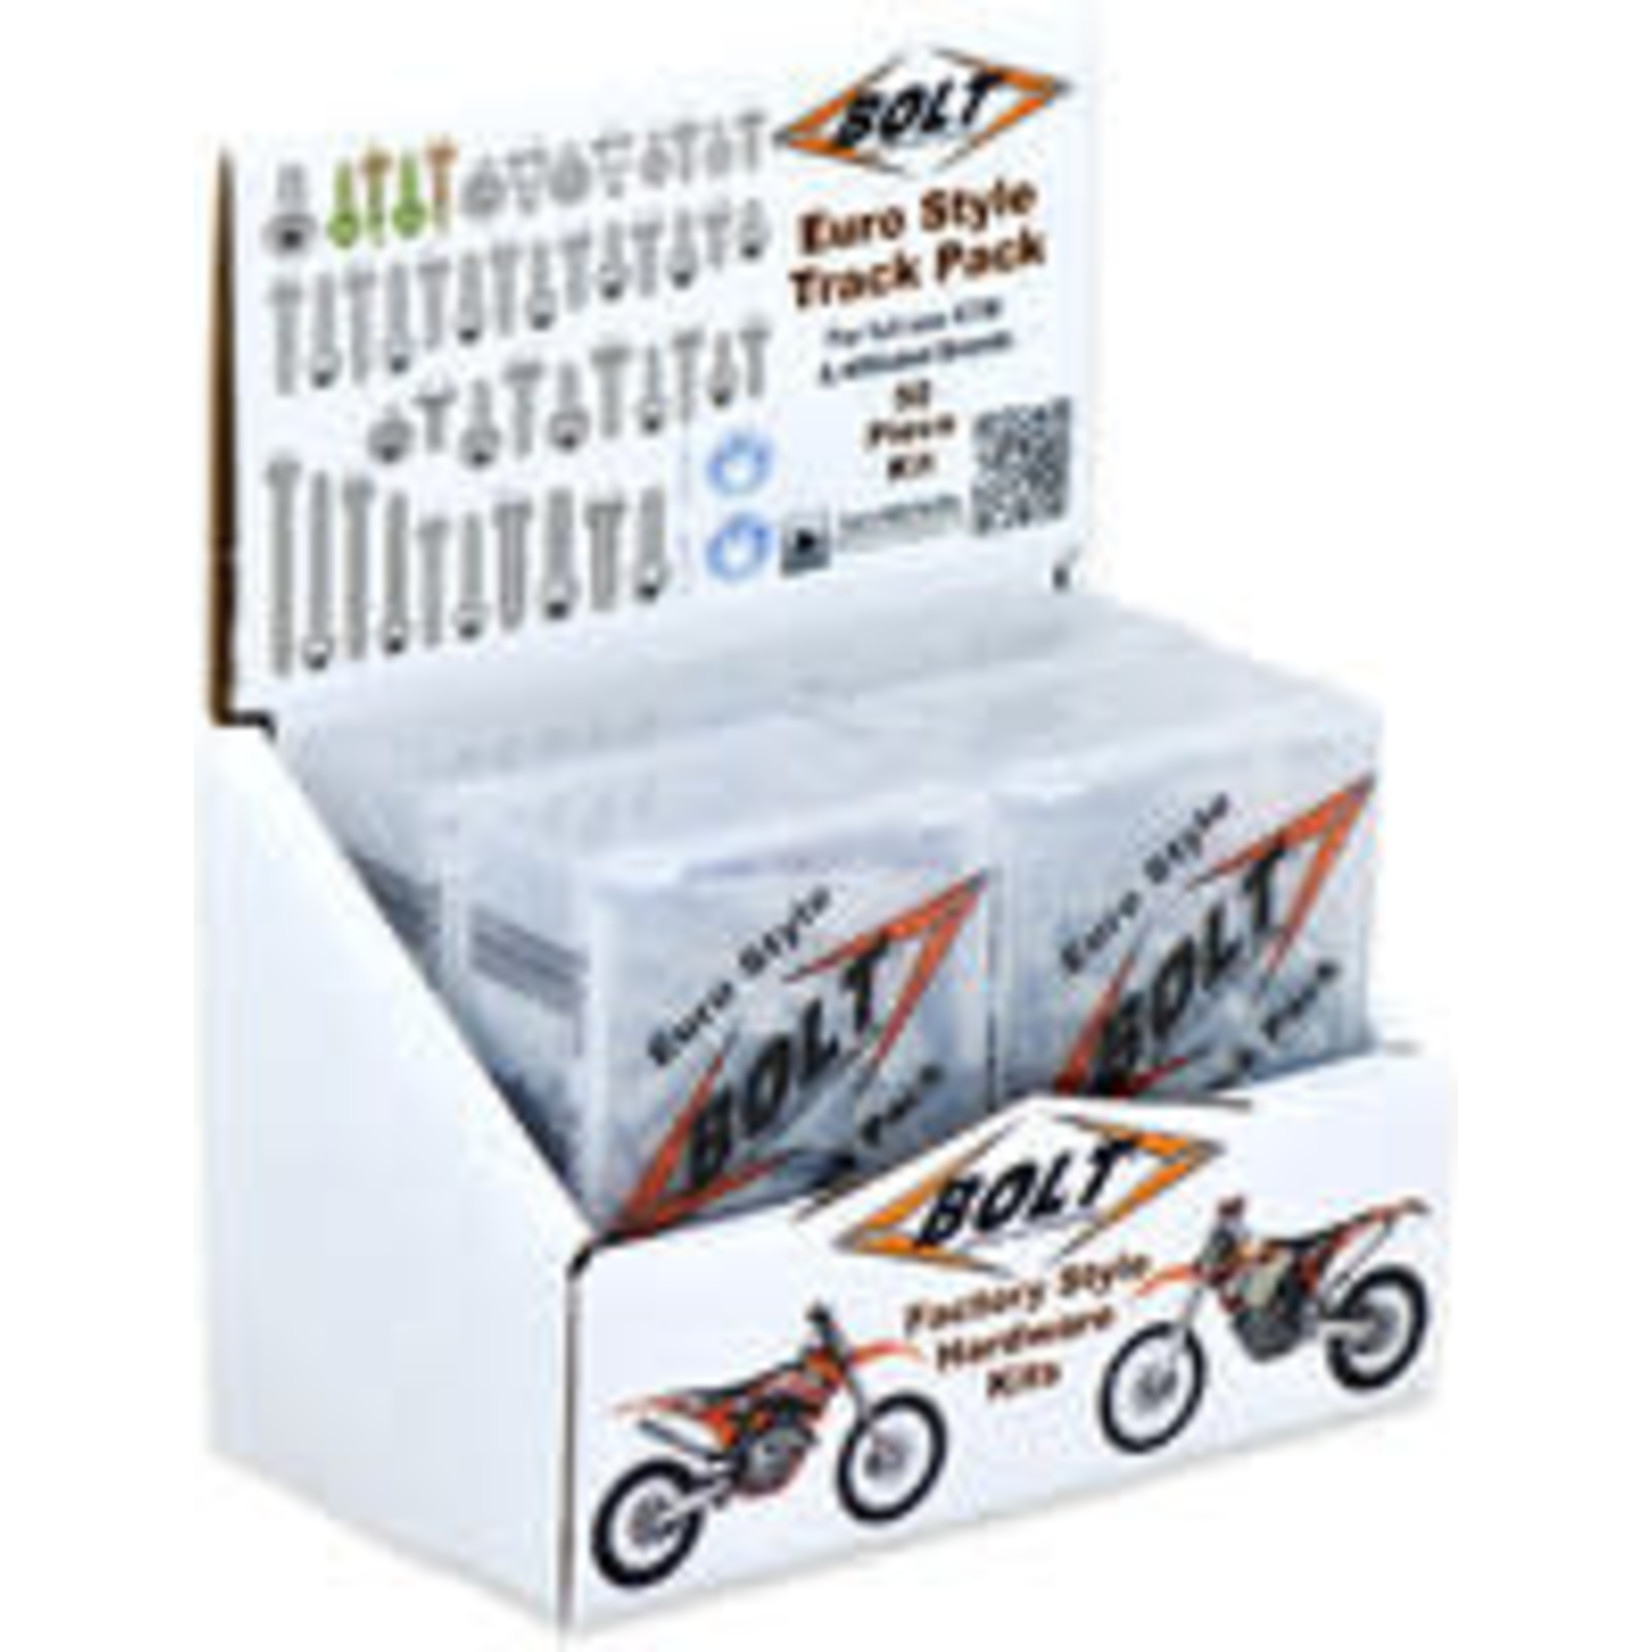 BOLT EURO STYLE TRACK PACK 2 6/PK DISPLAY 020-00105D